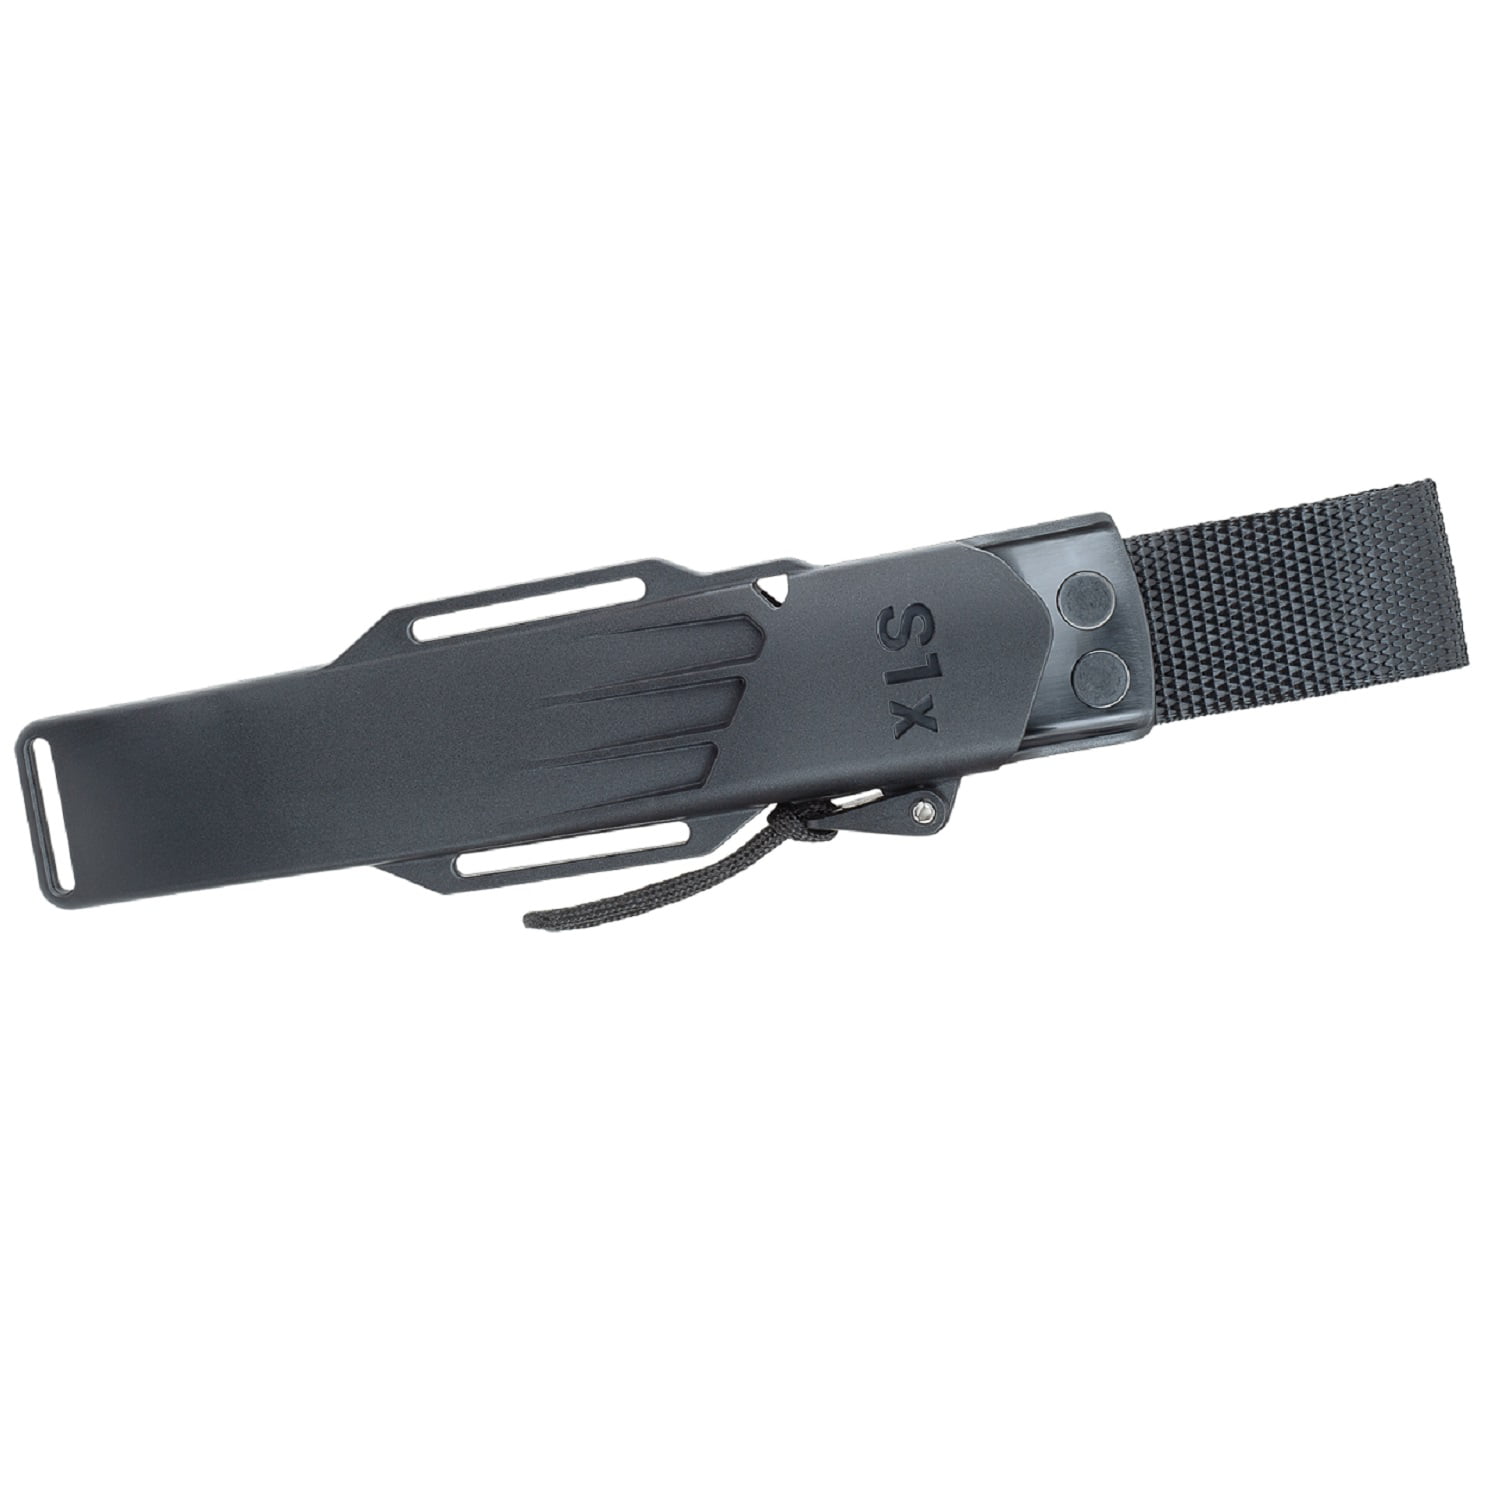 Fallkniven S1XEZ S1x Kydex Sheath Only for sale online 